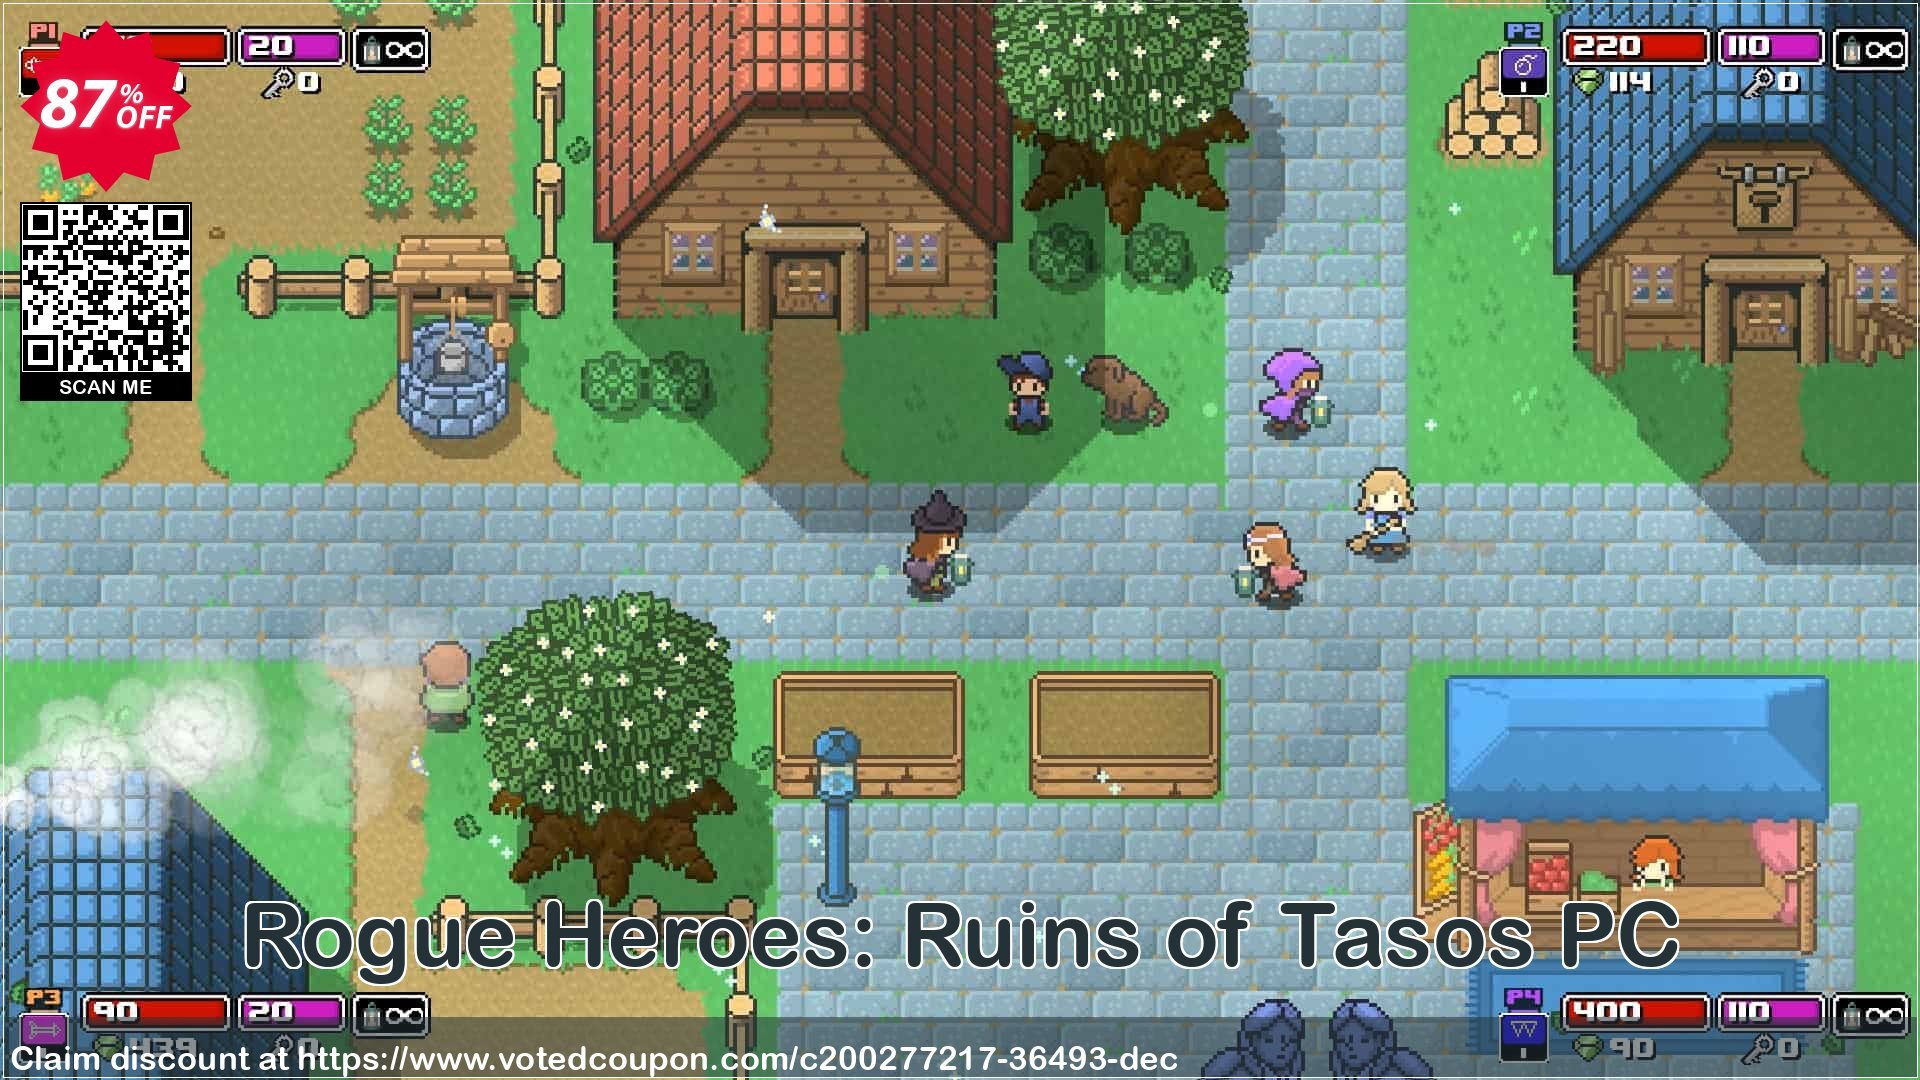 Rogue Heroes: Ruins of Tasos PC Coupon Code May 2024, 87% OFF - VotedCoupon